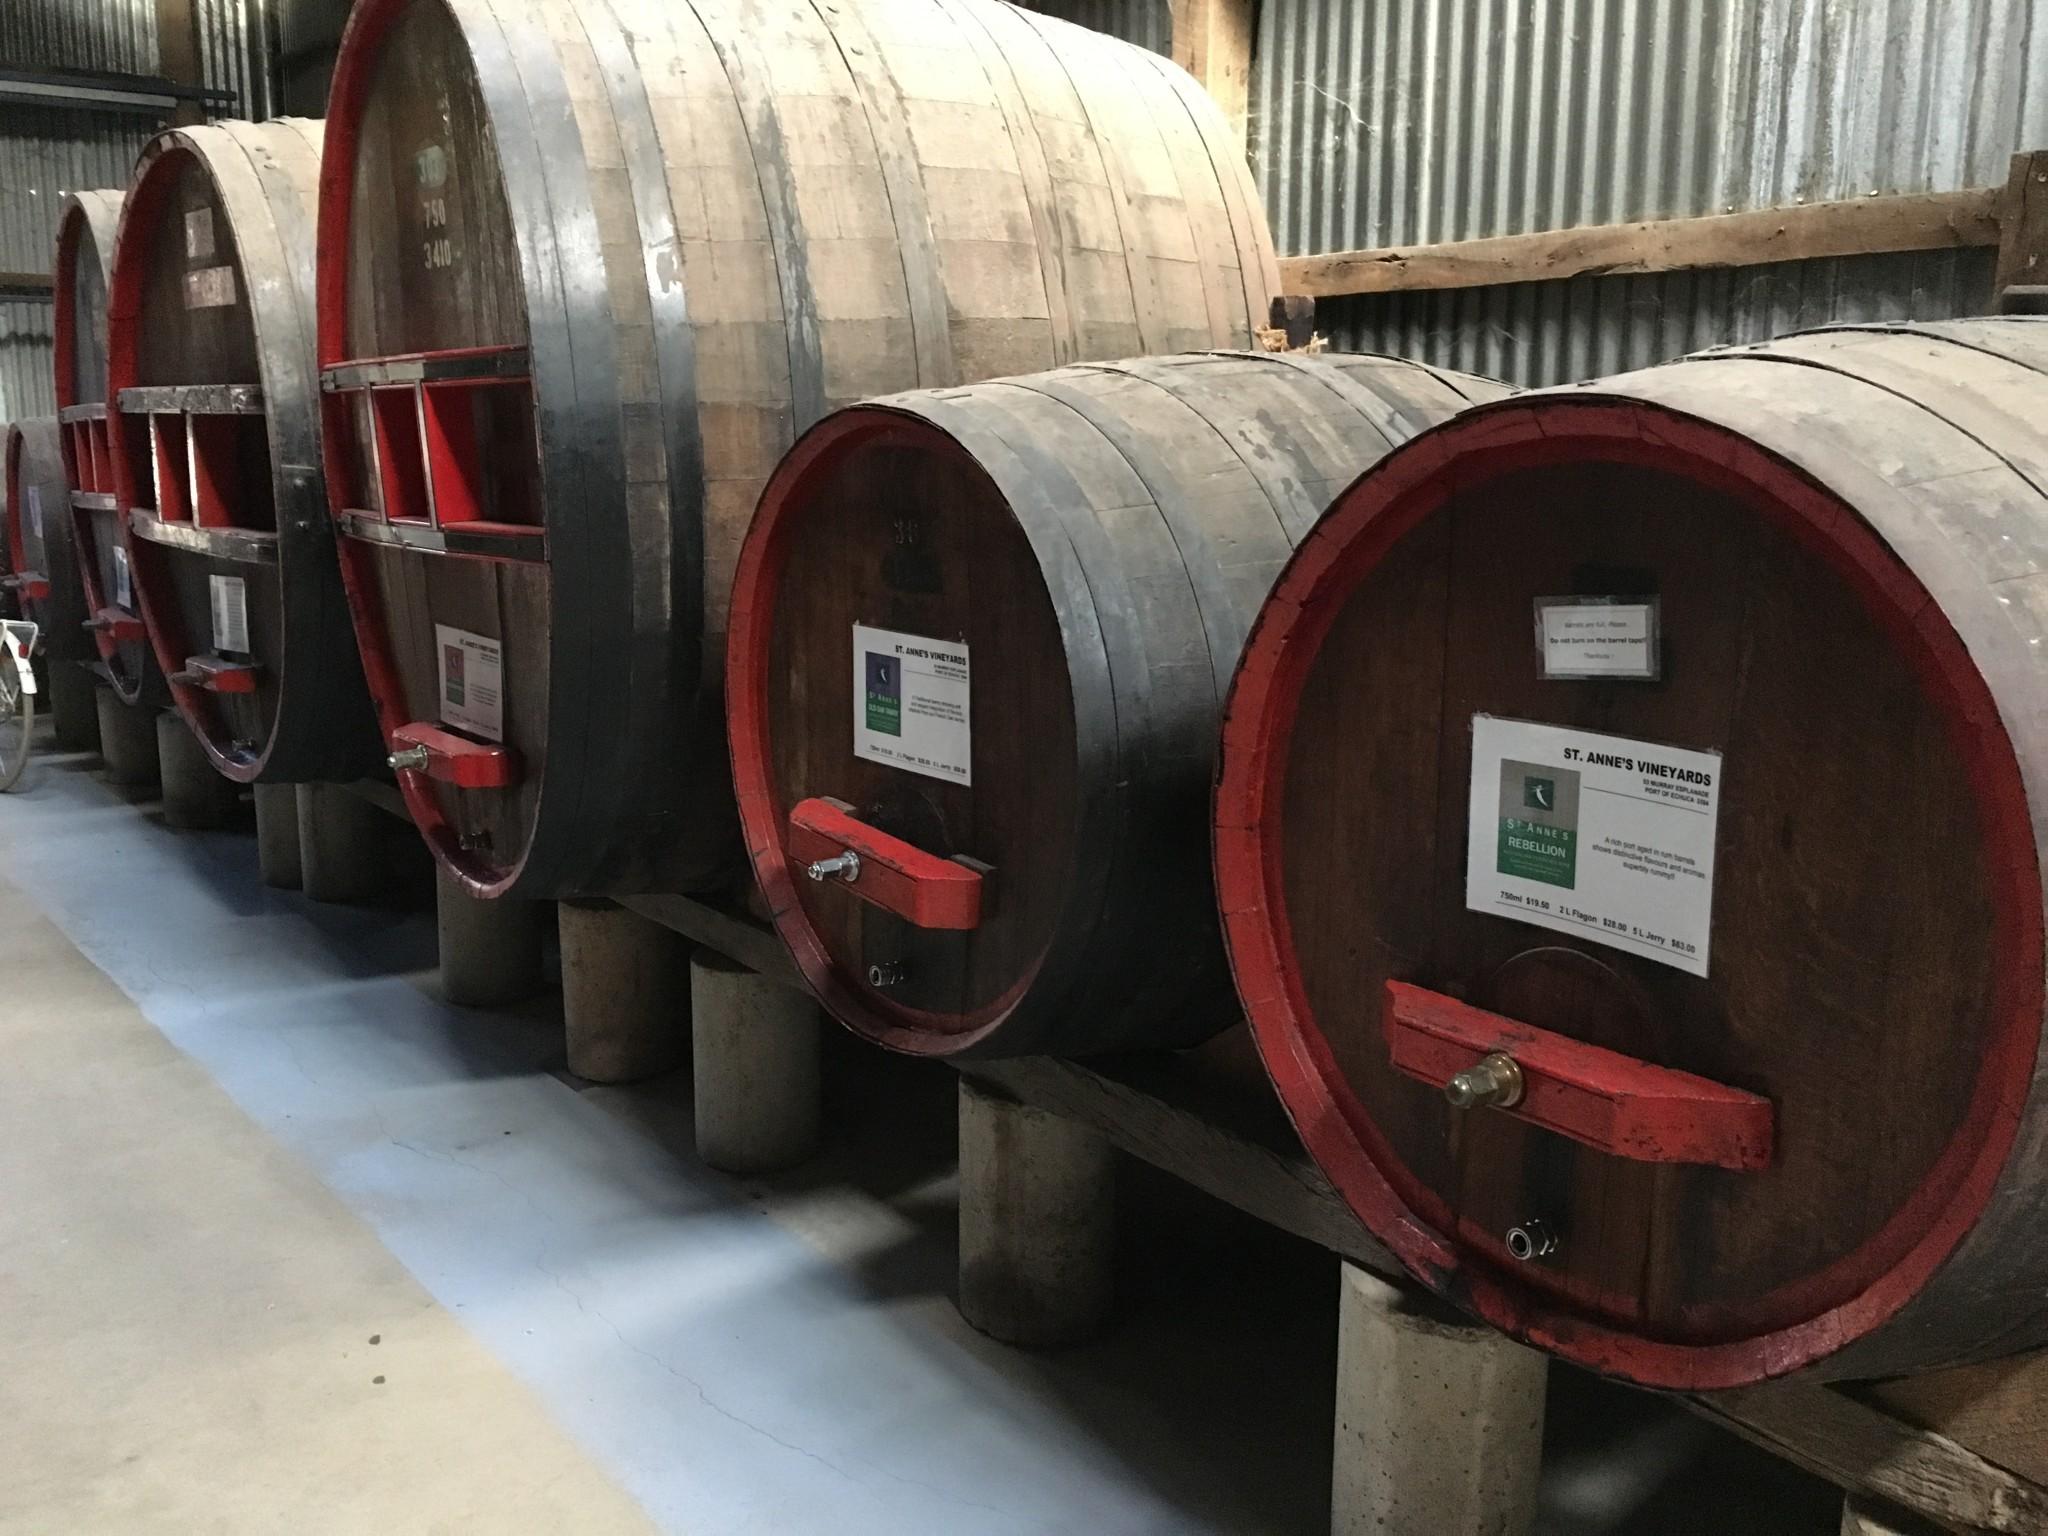 St Anne's Vineyard Small and Large Barrels